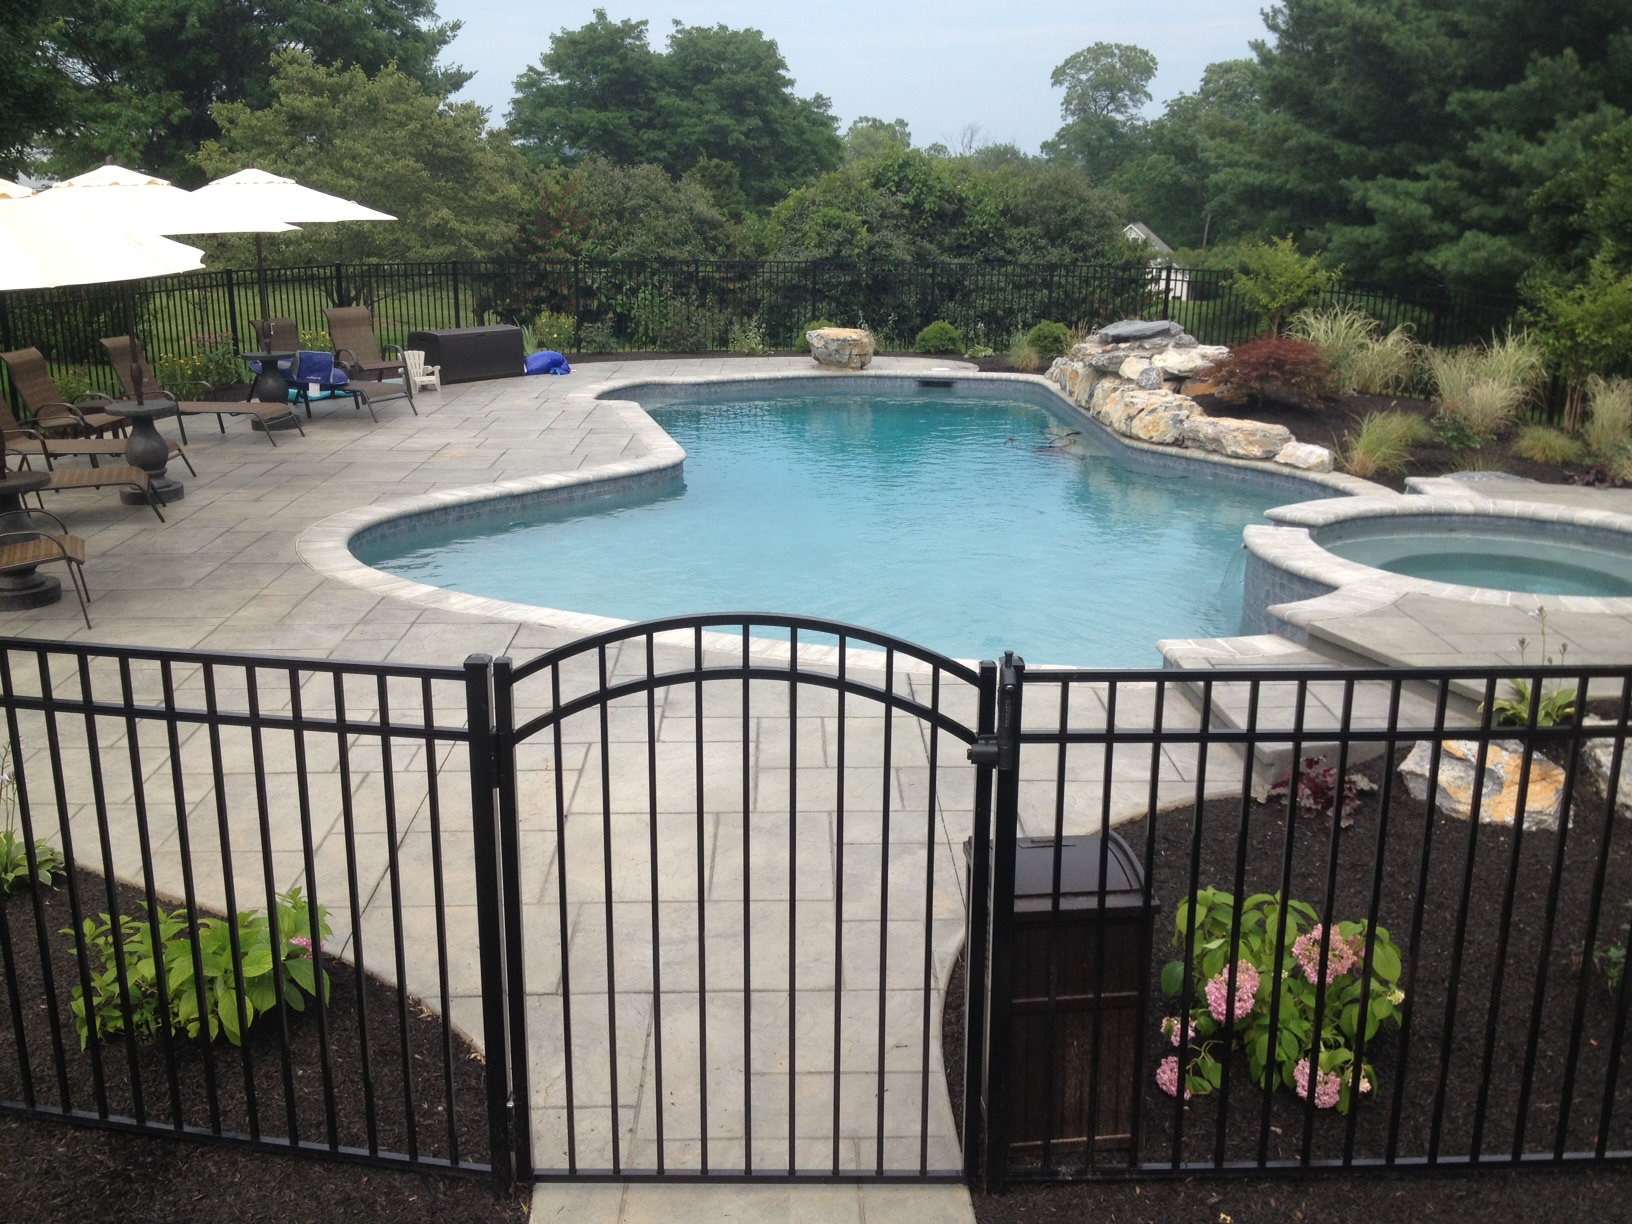 Swimming Pools Archive - Landscaping Company NJ & PA ...